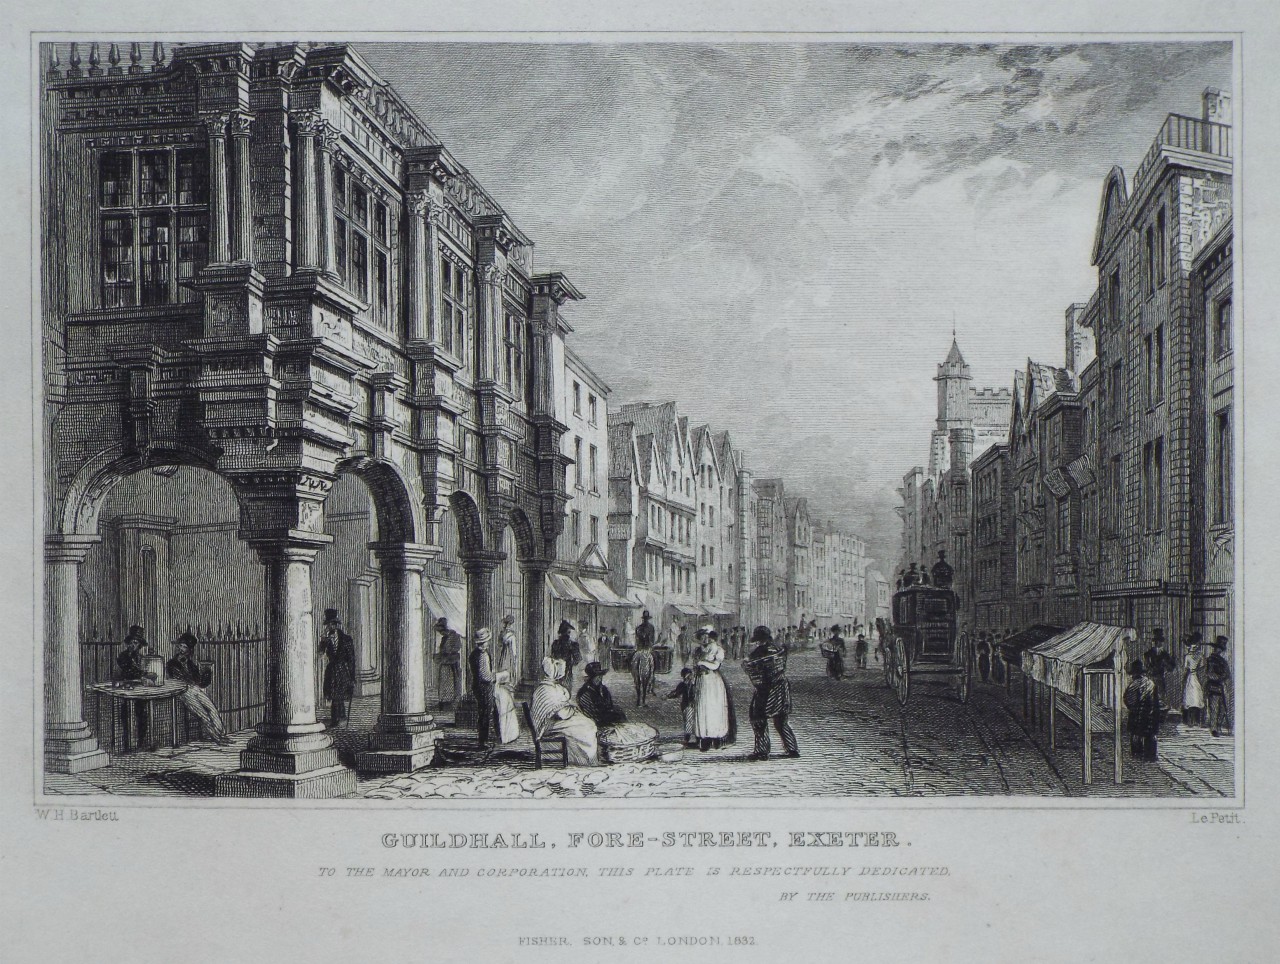 Print - Guildhall, Fore-Street, Exeter. - Le